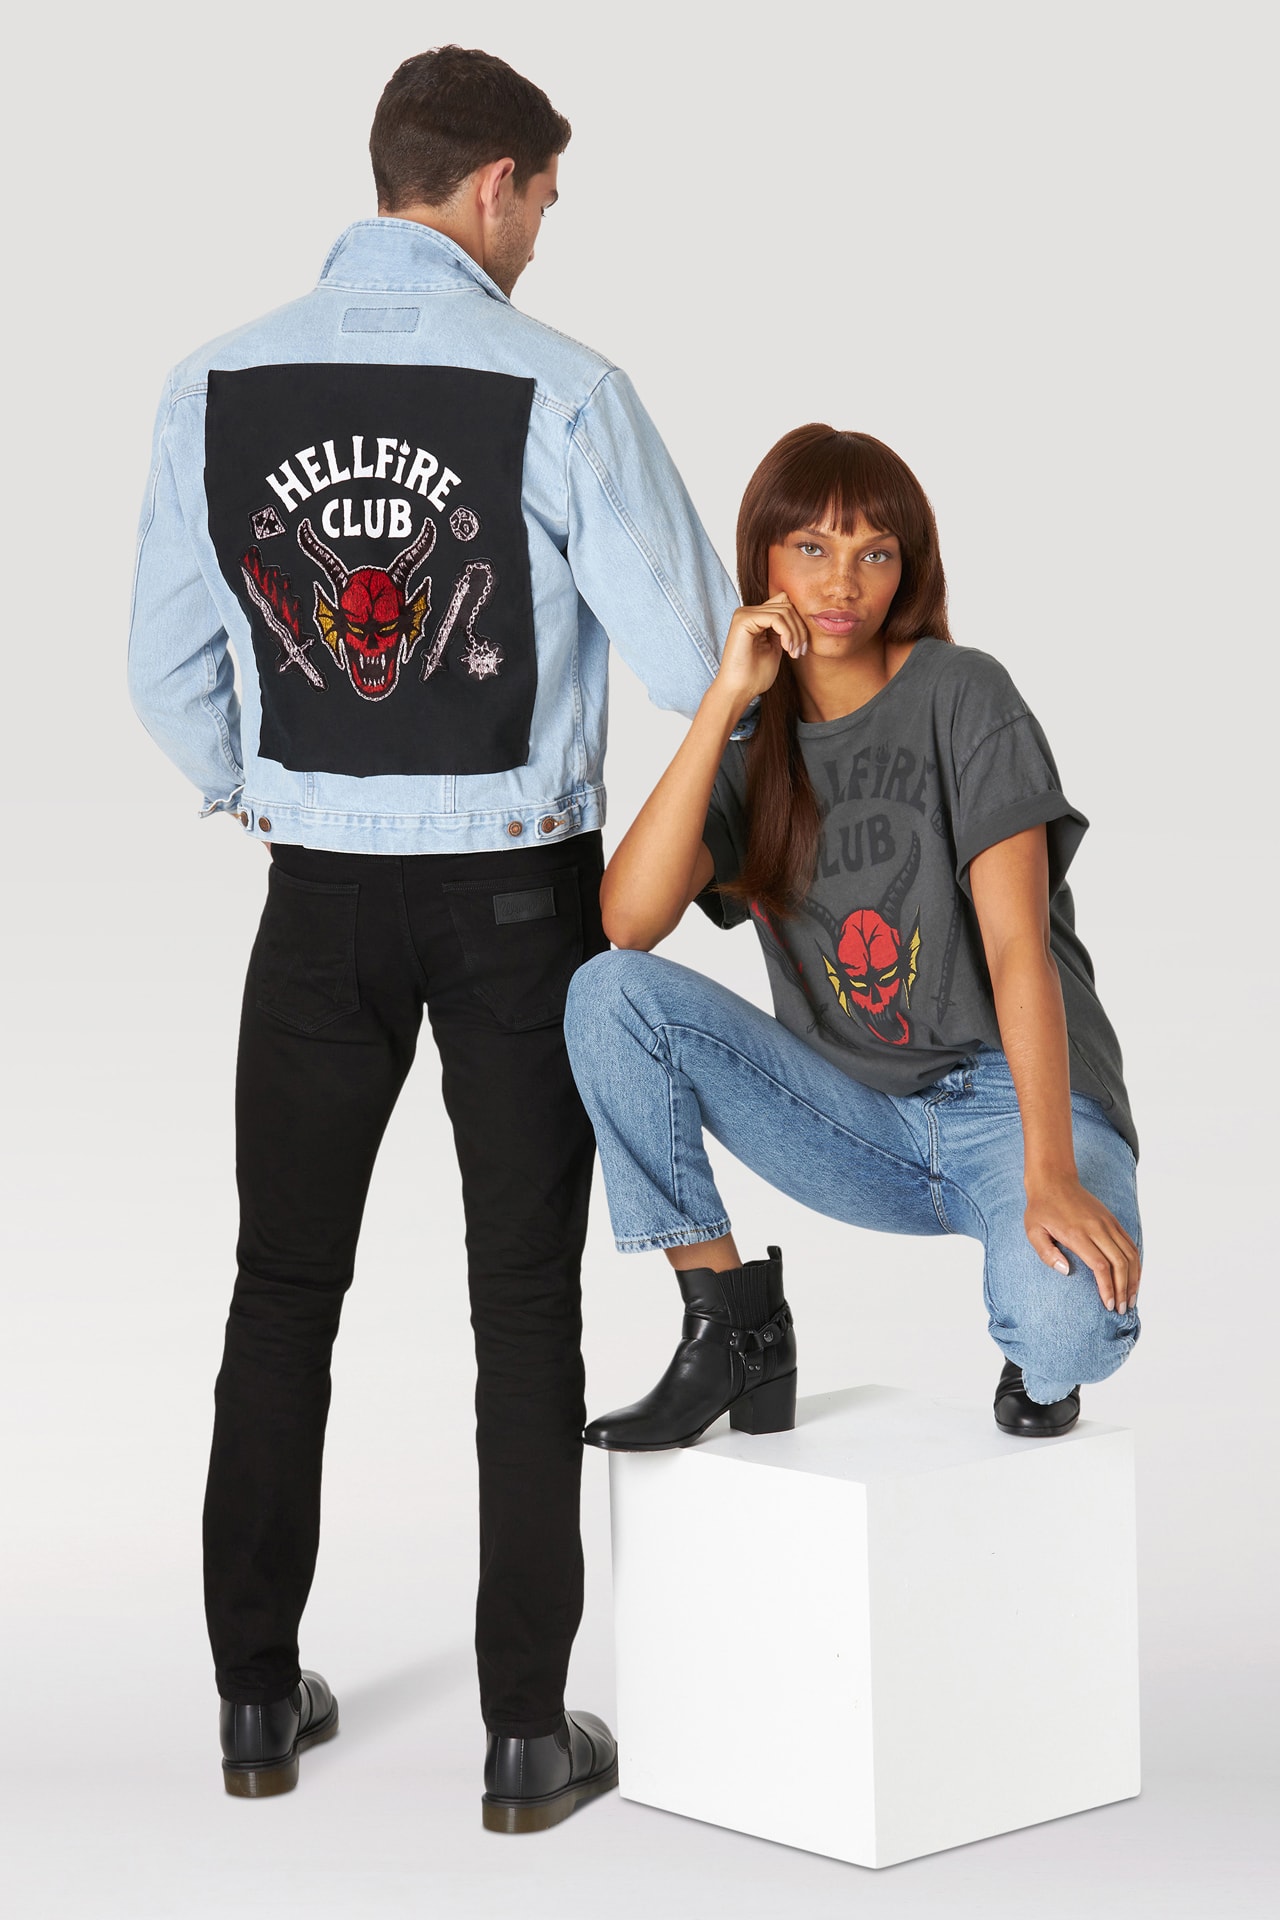 Collection launch Hellfire club inspired 80s 18th century Britain and Ireland historical crew a men’s t-shirt, women’s t-shirt & gender neutral denim jacket